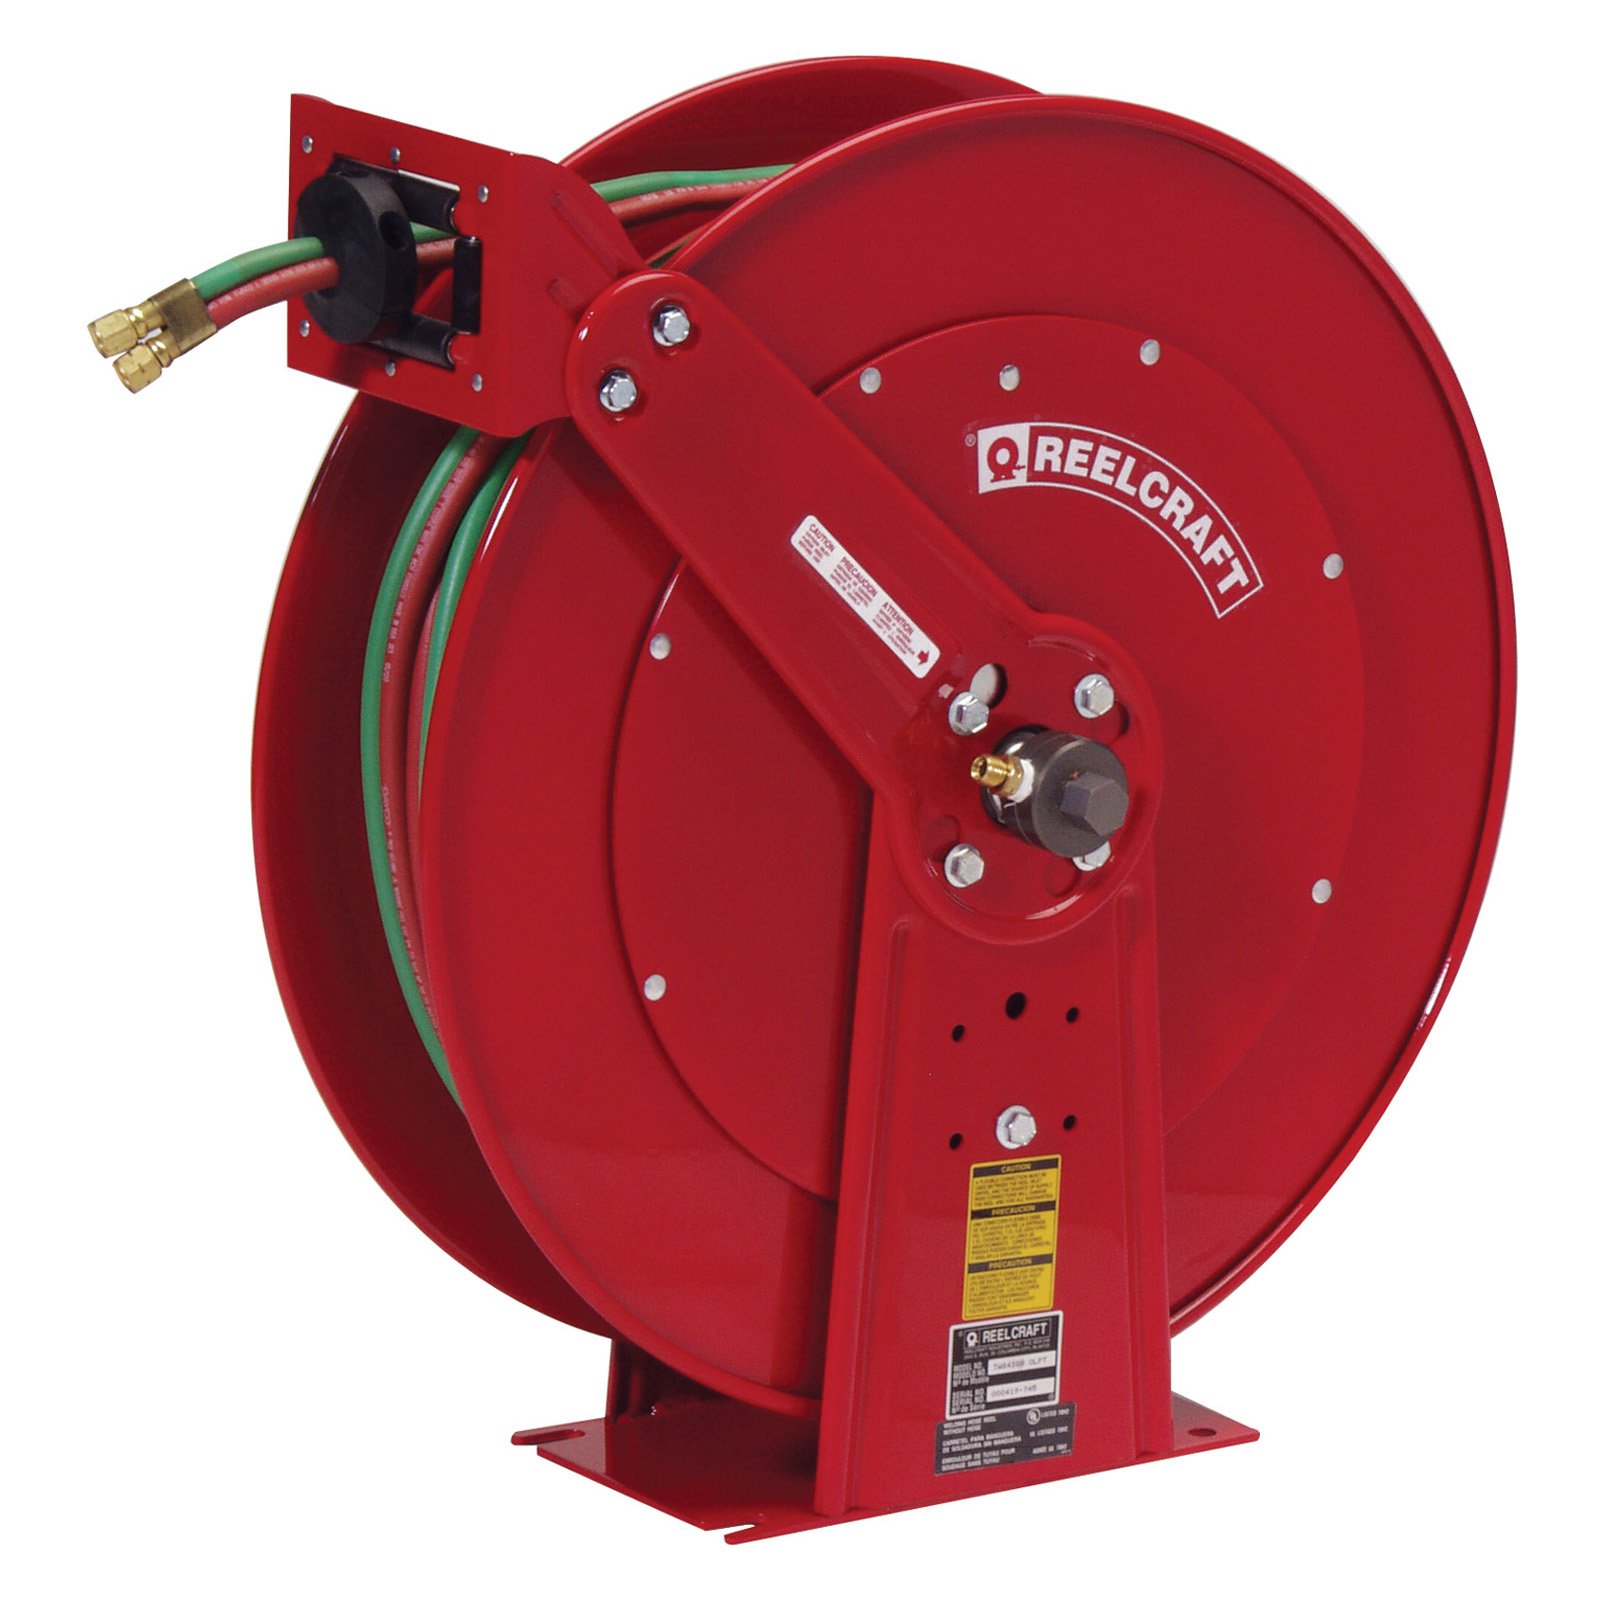 Reelcraft Gas-Welding T-Grade Hose Reels with Hose, 50 ft, Retractable - image 2 of 2